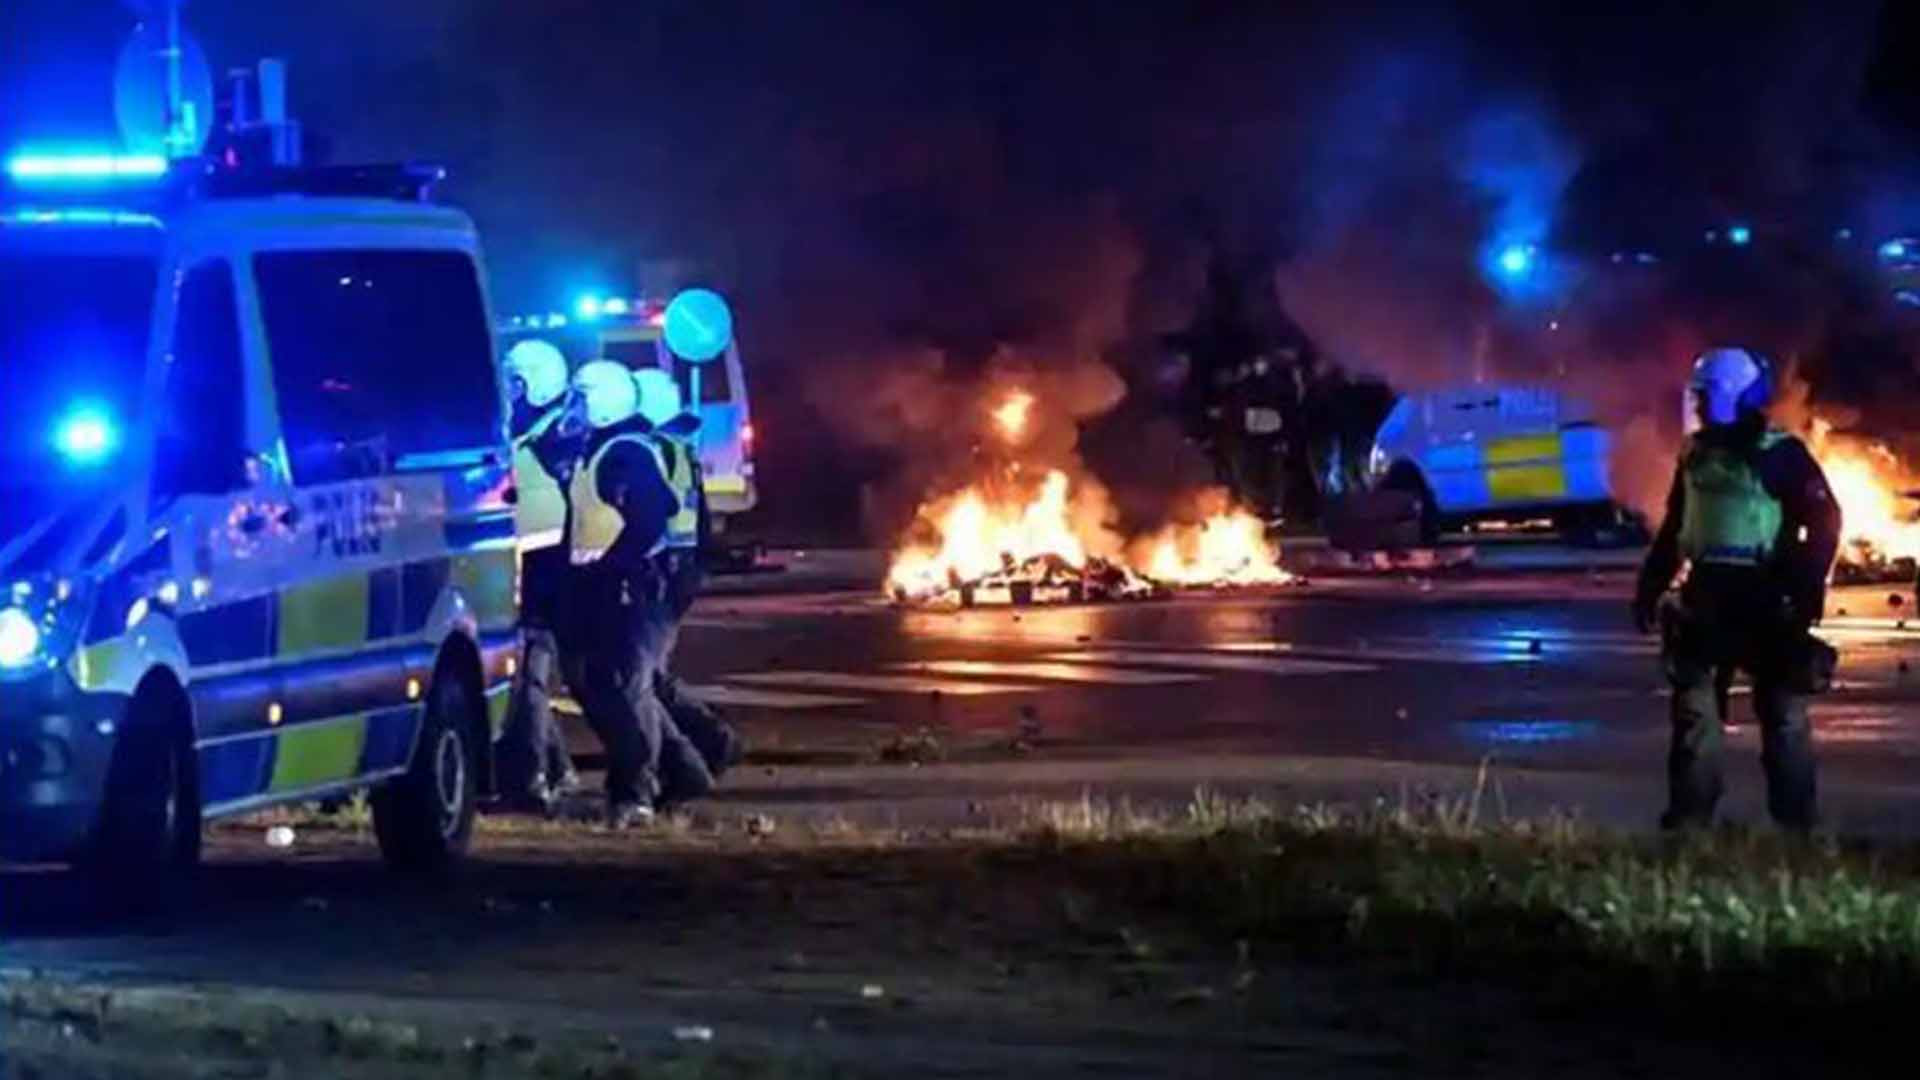 Riots in Sweden’s Malmo city after Quran burning by far-right activists